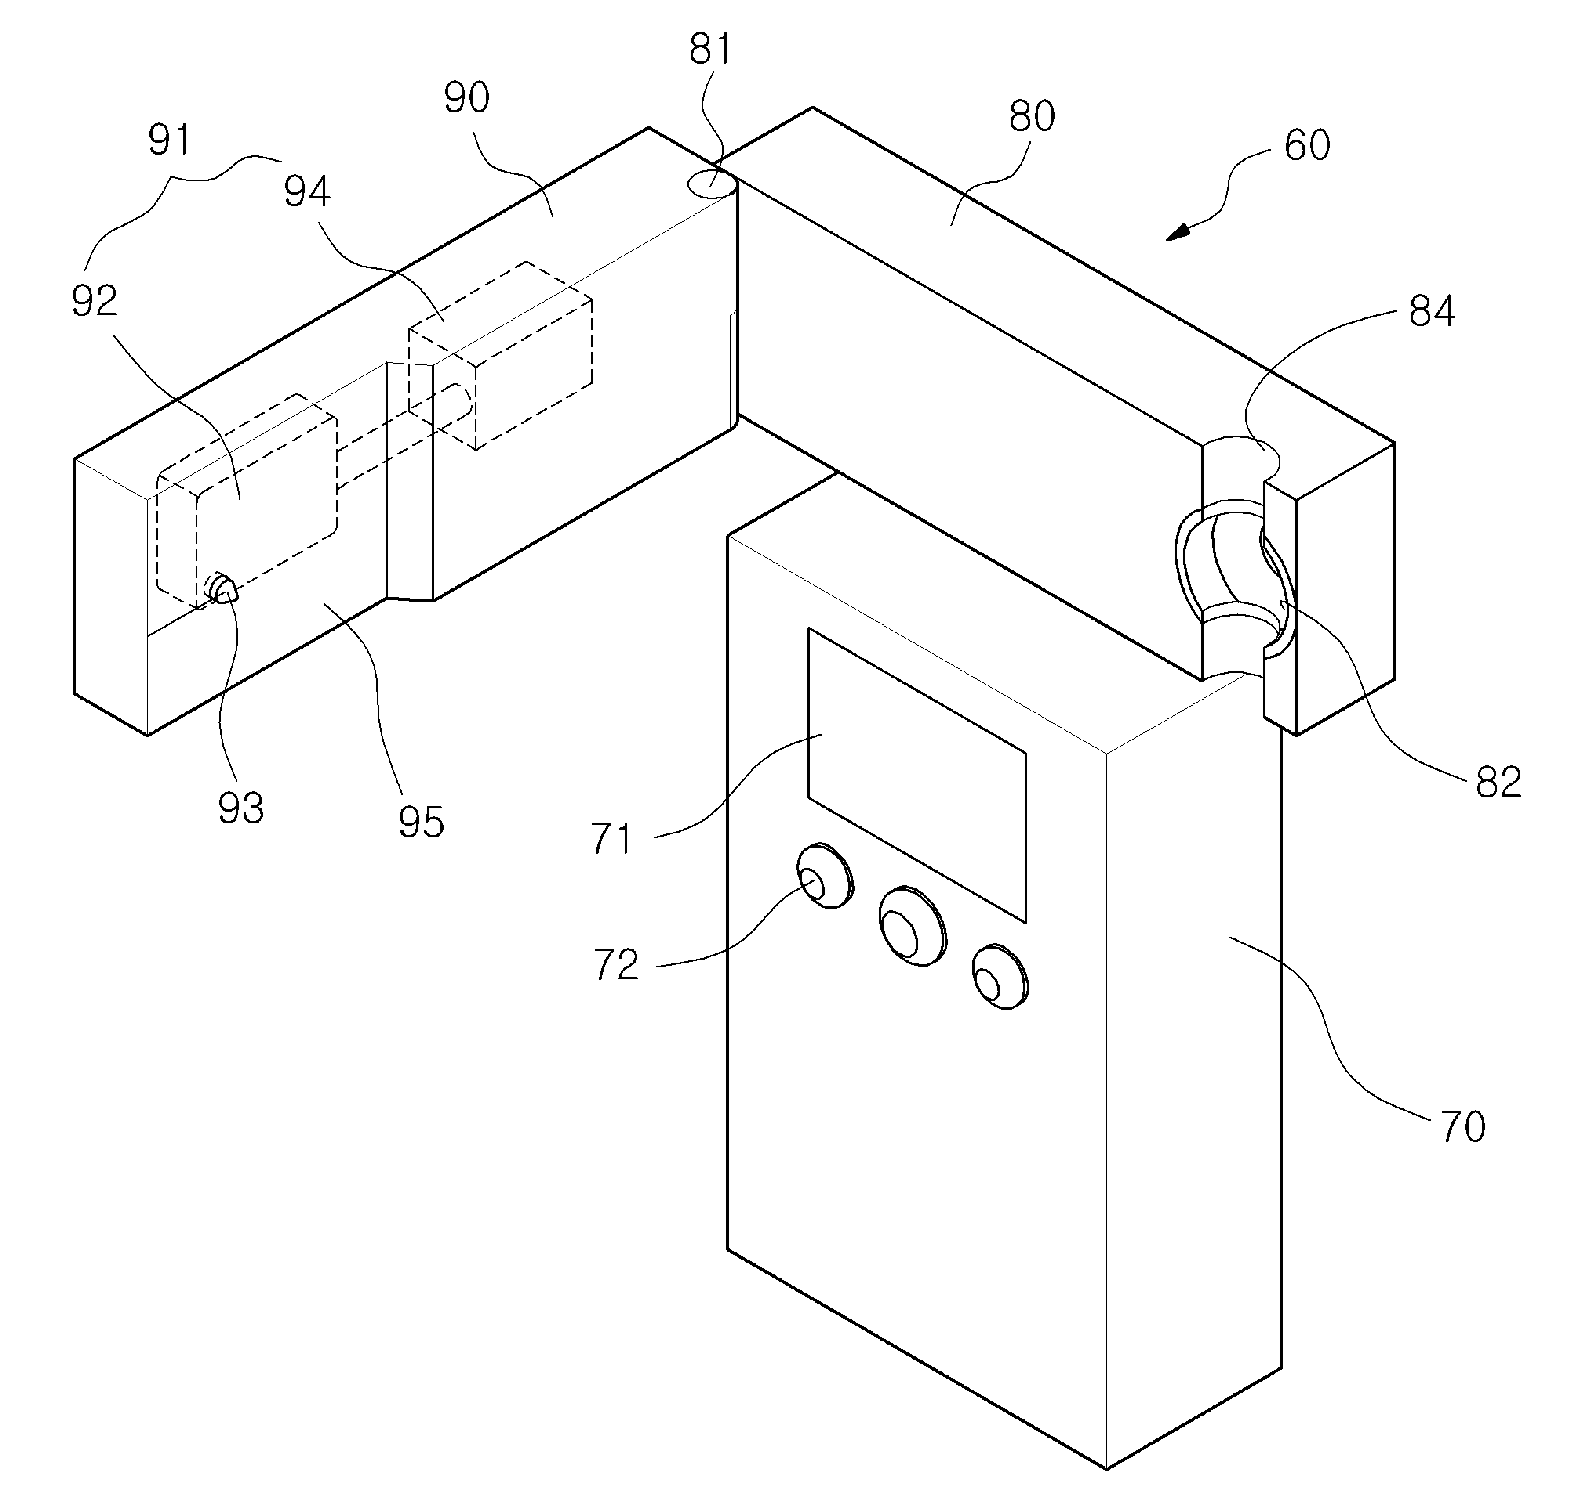 Device for measuring blood alcohol concentration